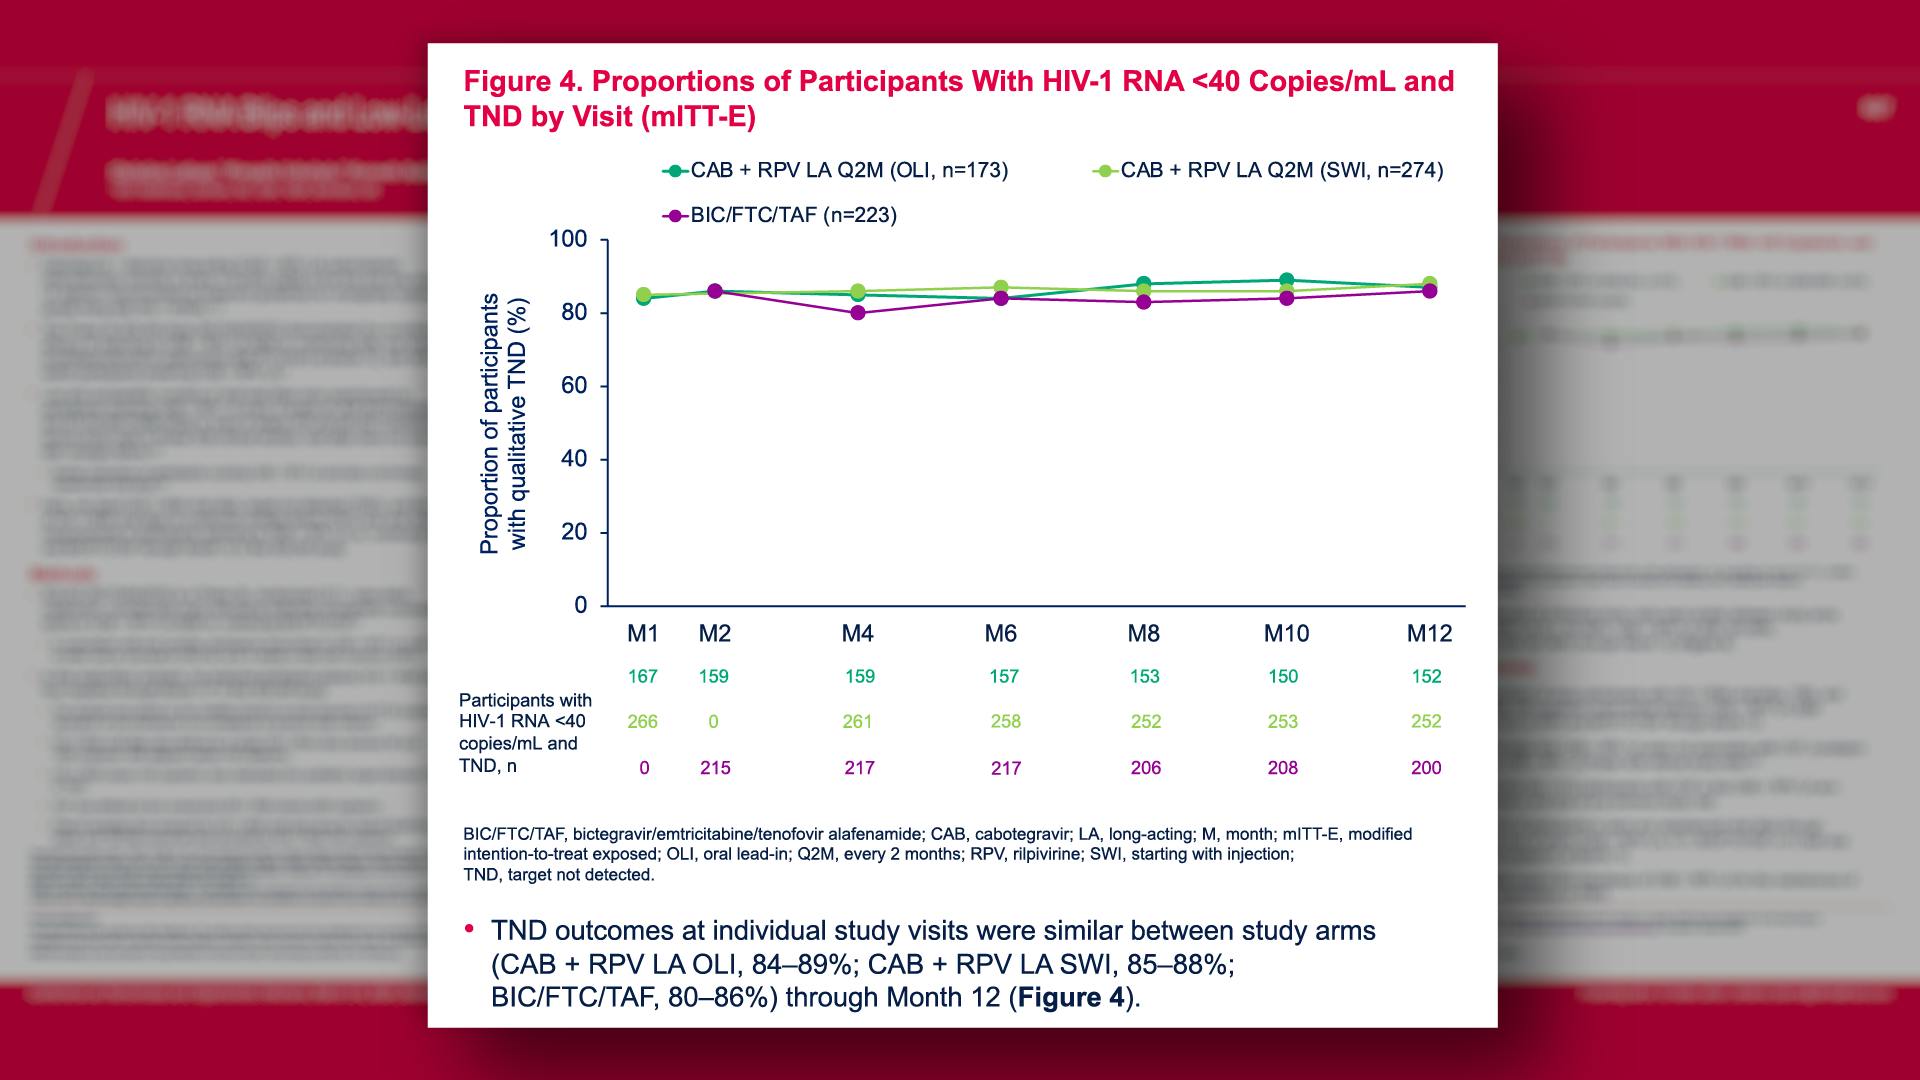 Proportions of Participants With HIV-1 RNA <40 Copies/mL and TND by Visit (mITT-E)